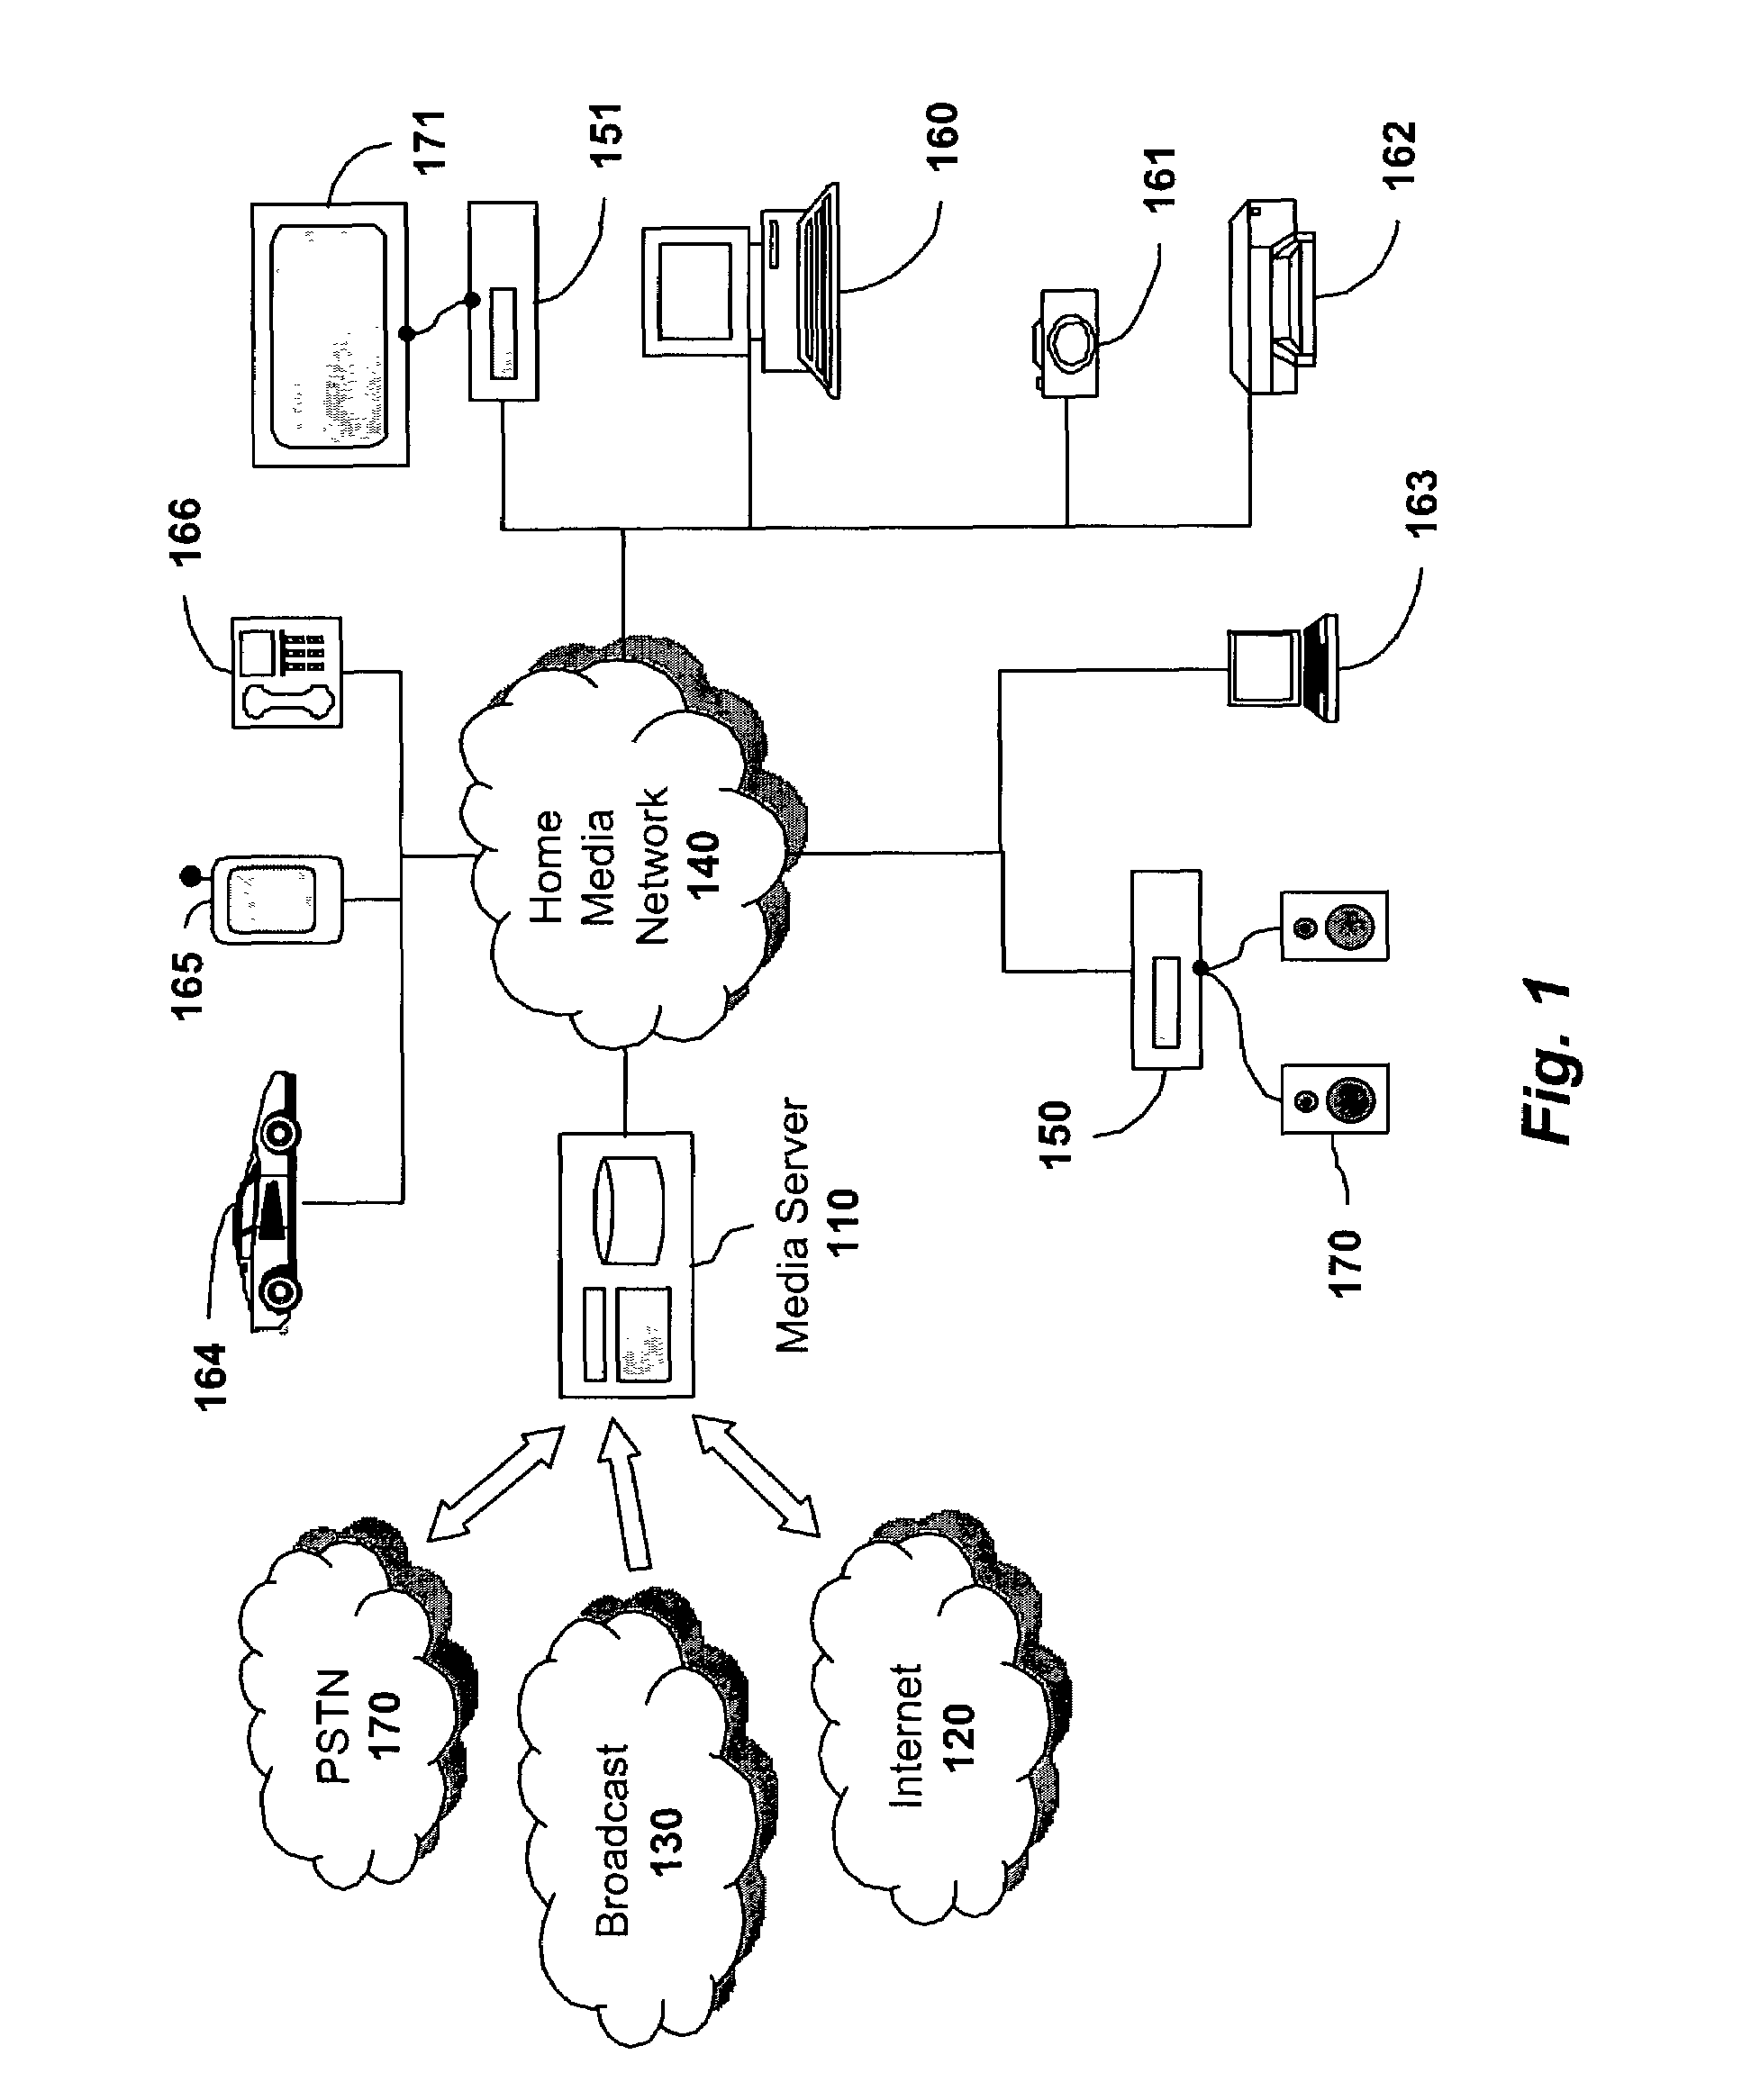 System and method for automatically sensing the state of a video display device